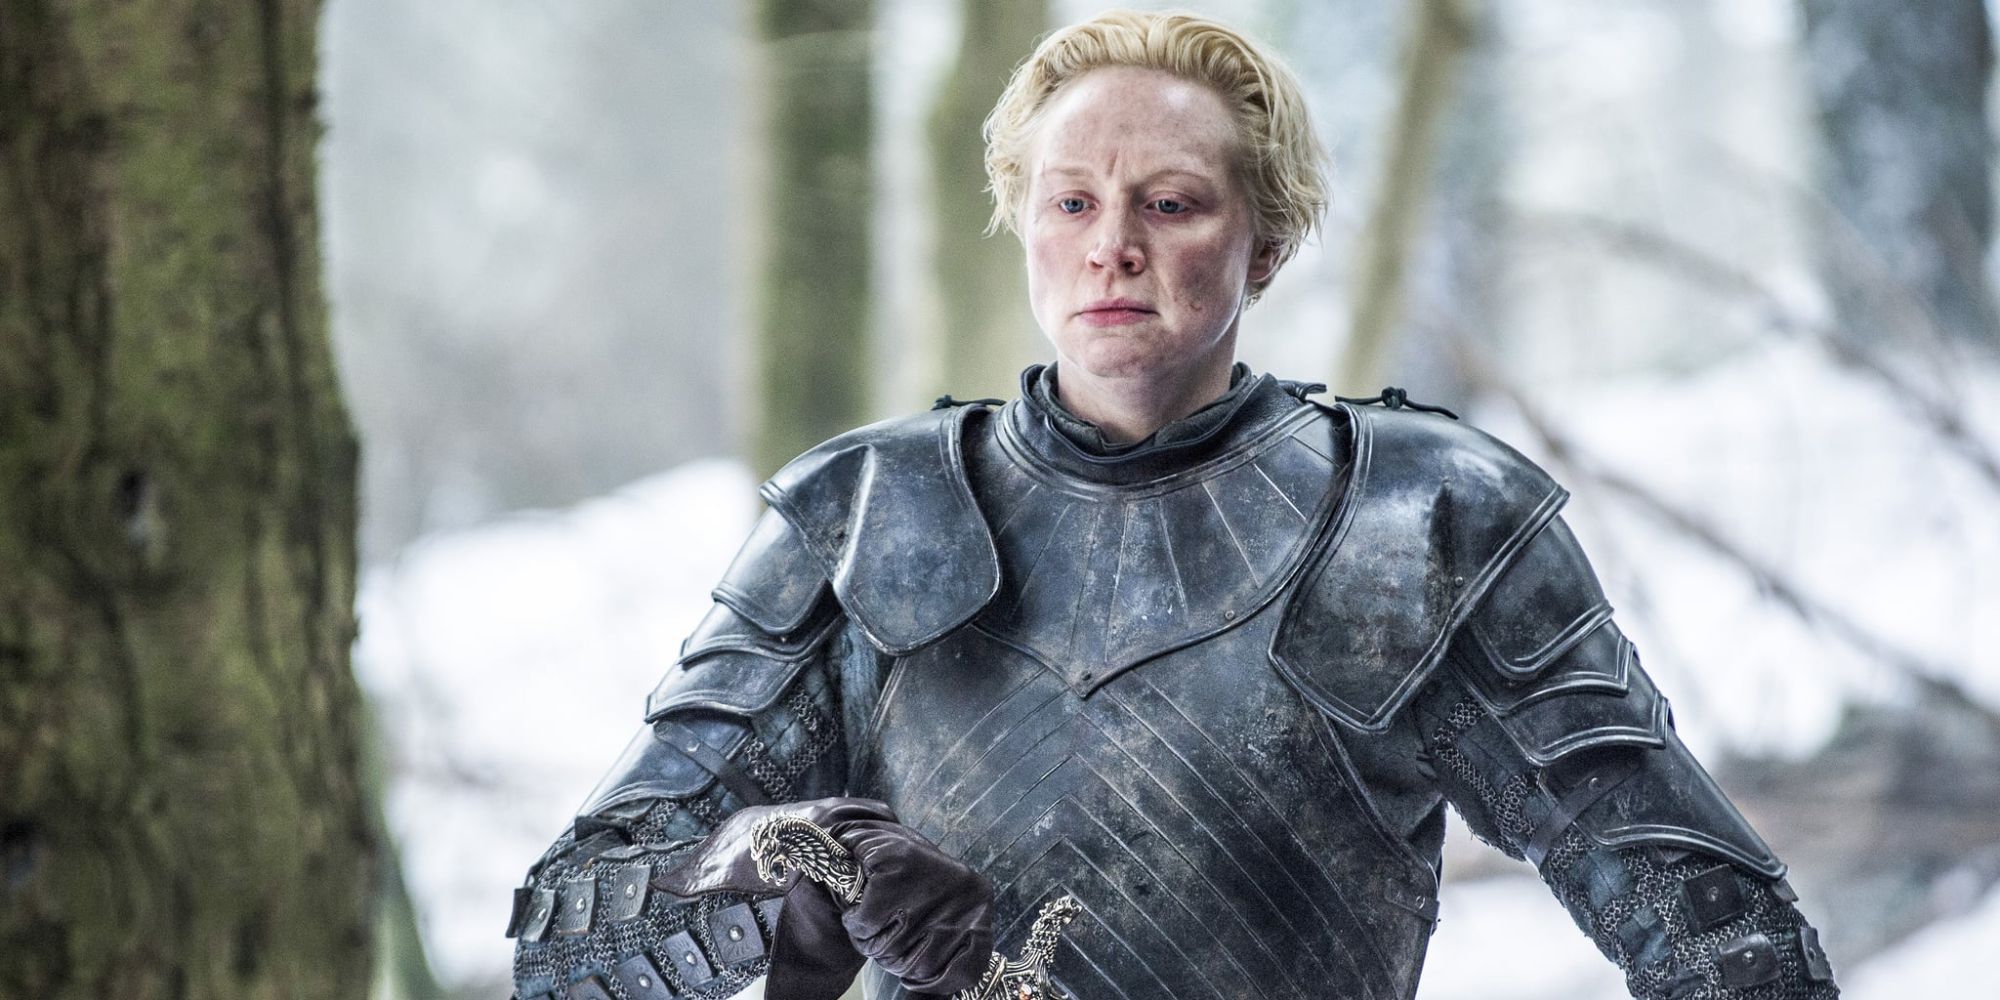 Game of Thrones Top 10 Brienne Of Tarth Quotes I Brienne Of Tarth Sentence You To Die. Do You Have Any Last Words